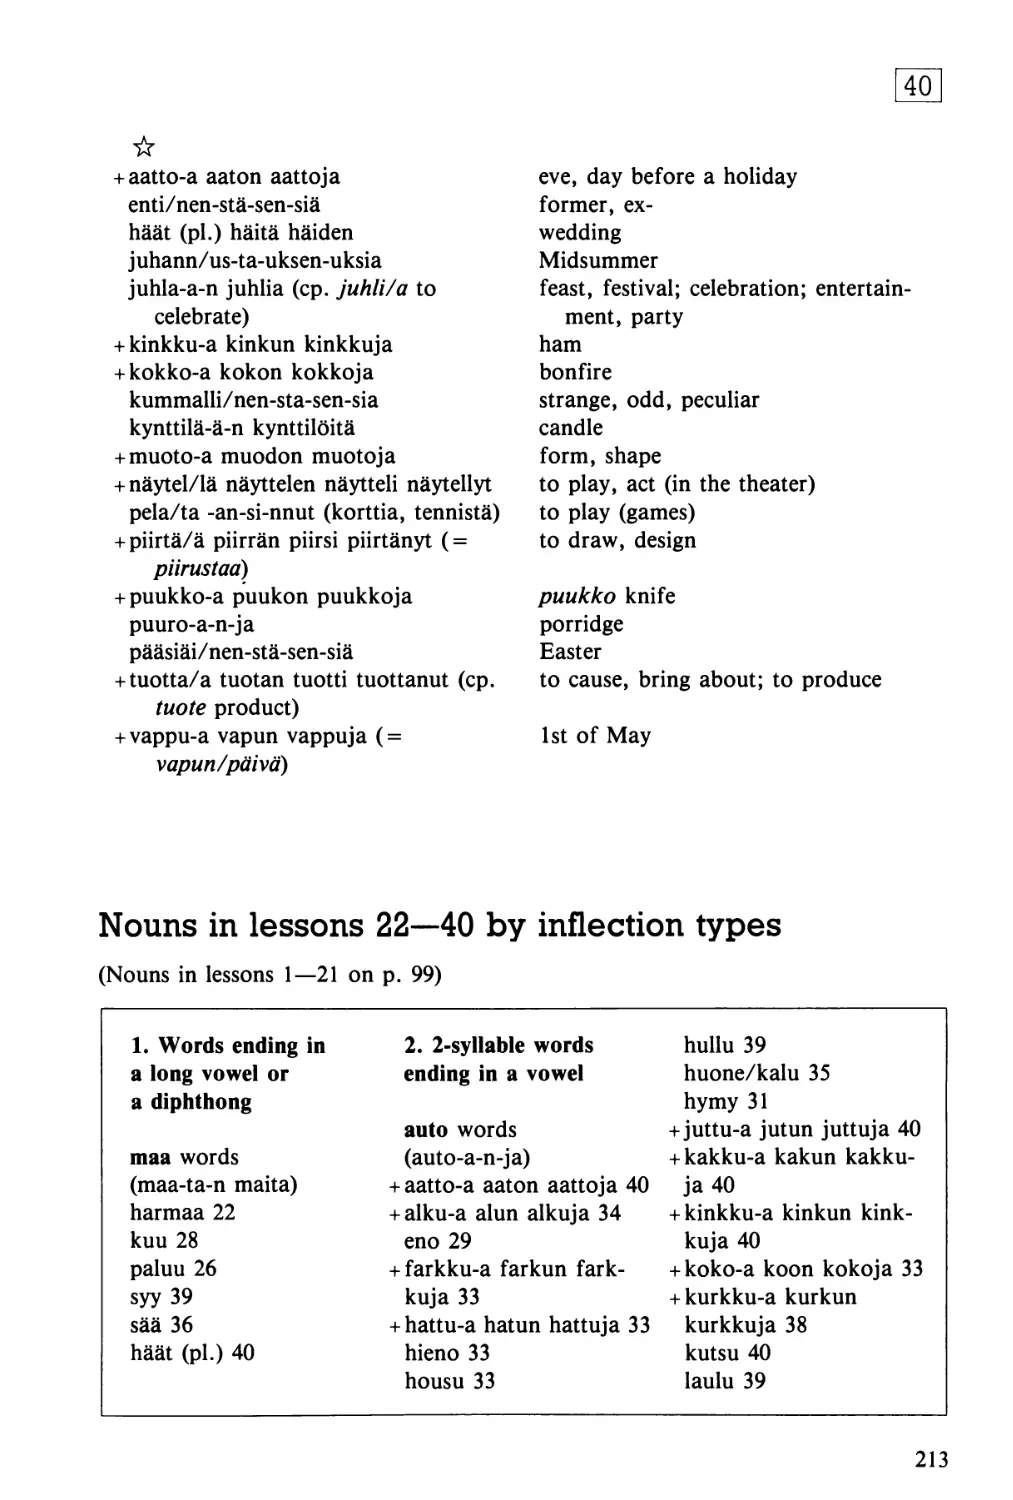 Nouns in lessons 22—40 by inflection types